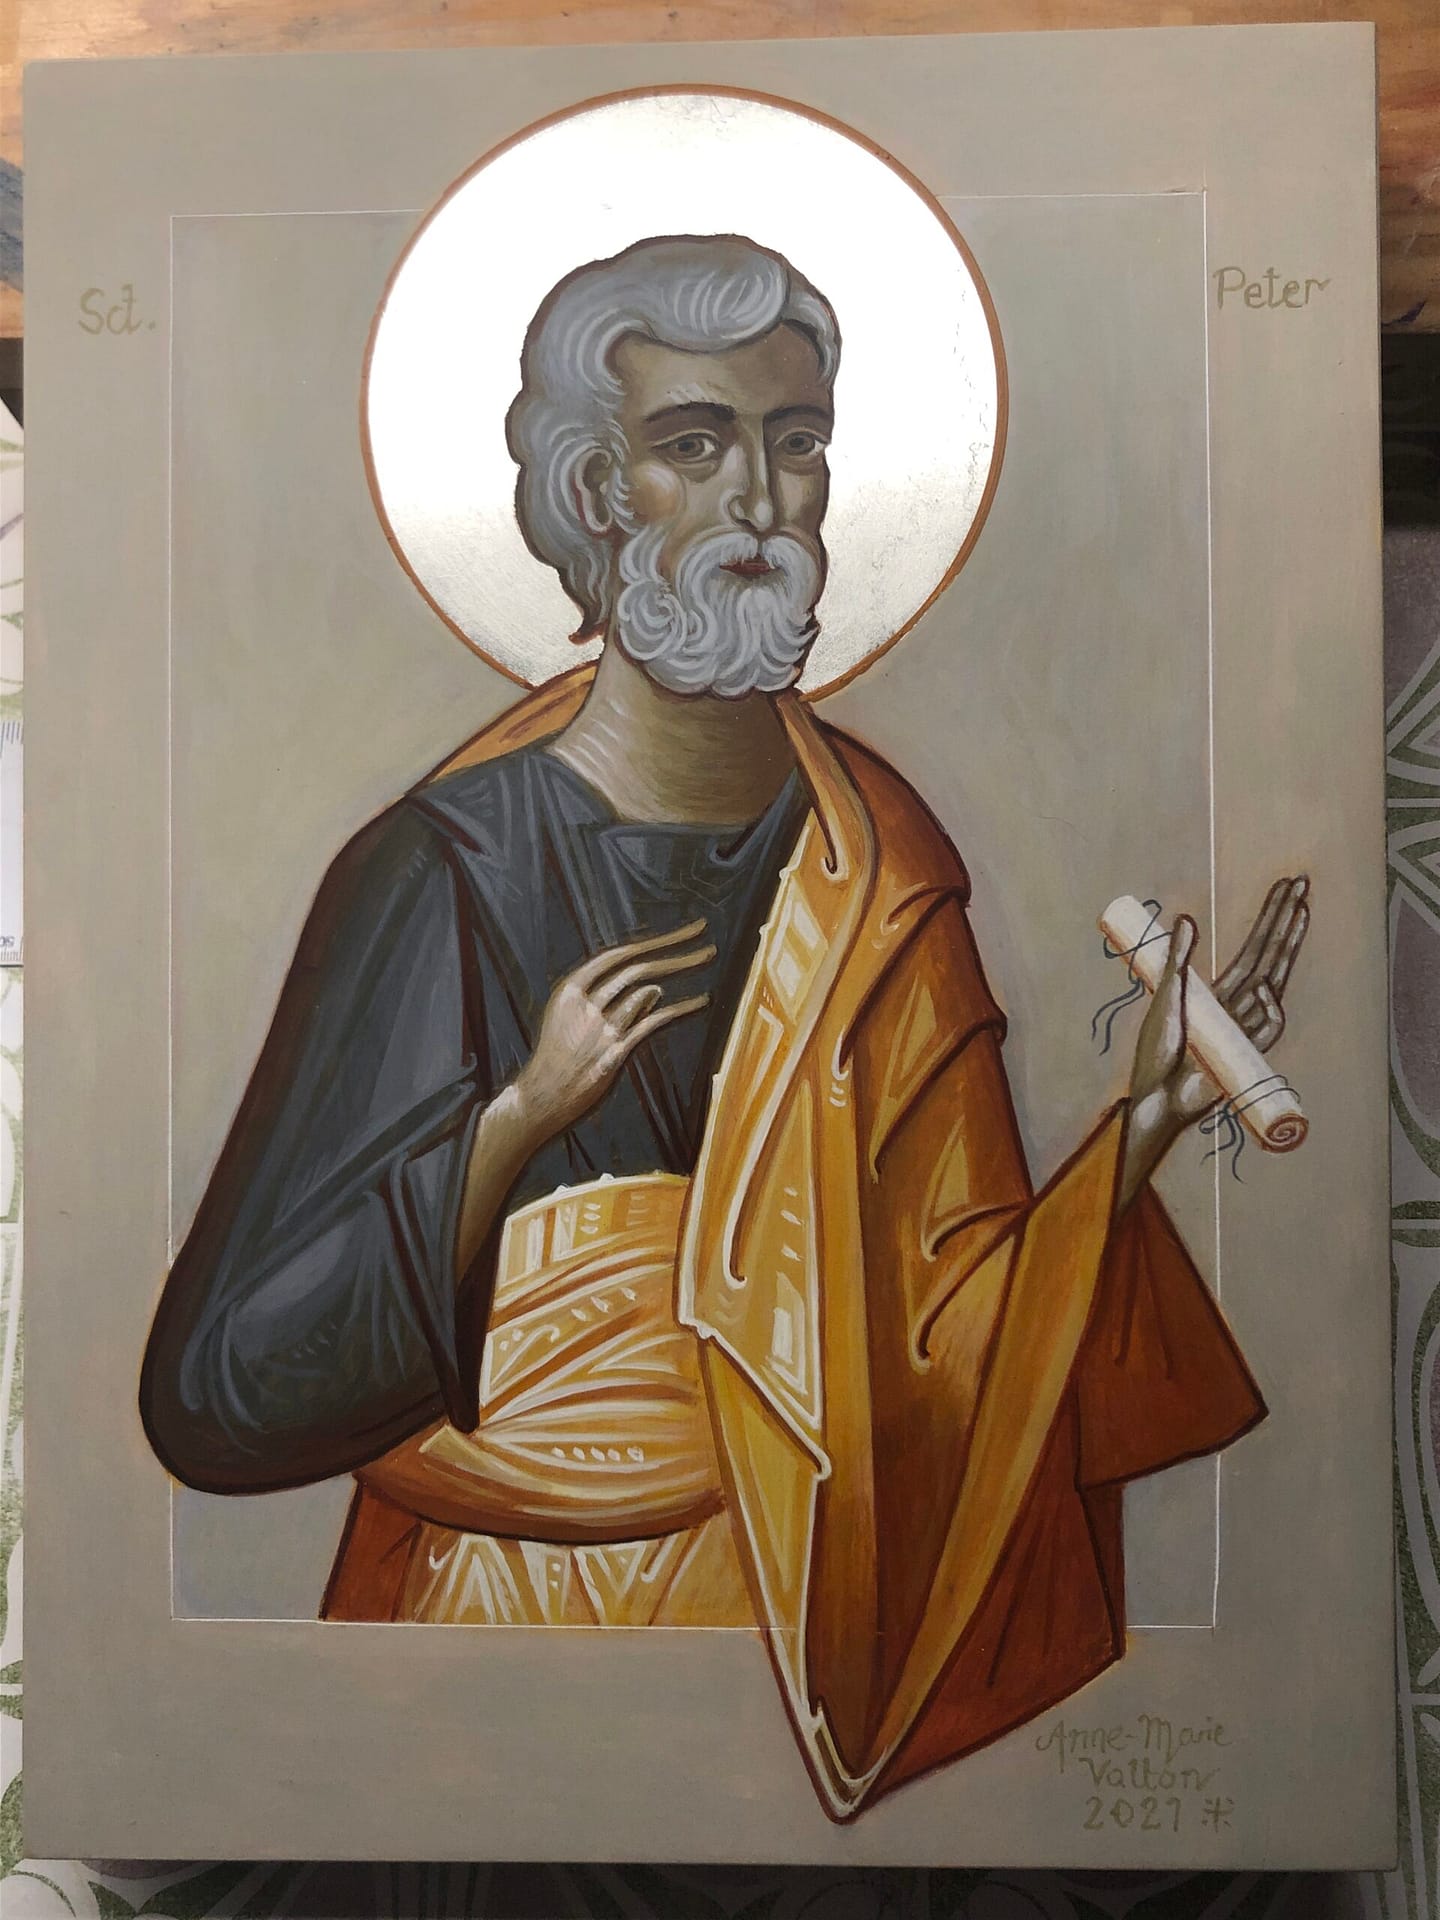 The finished icon of St. Peter